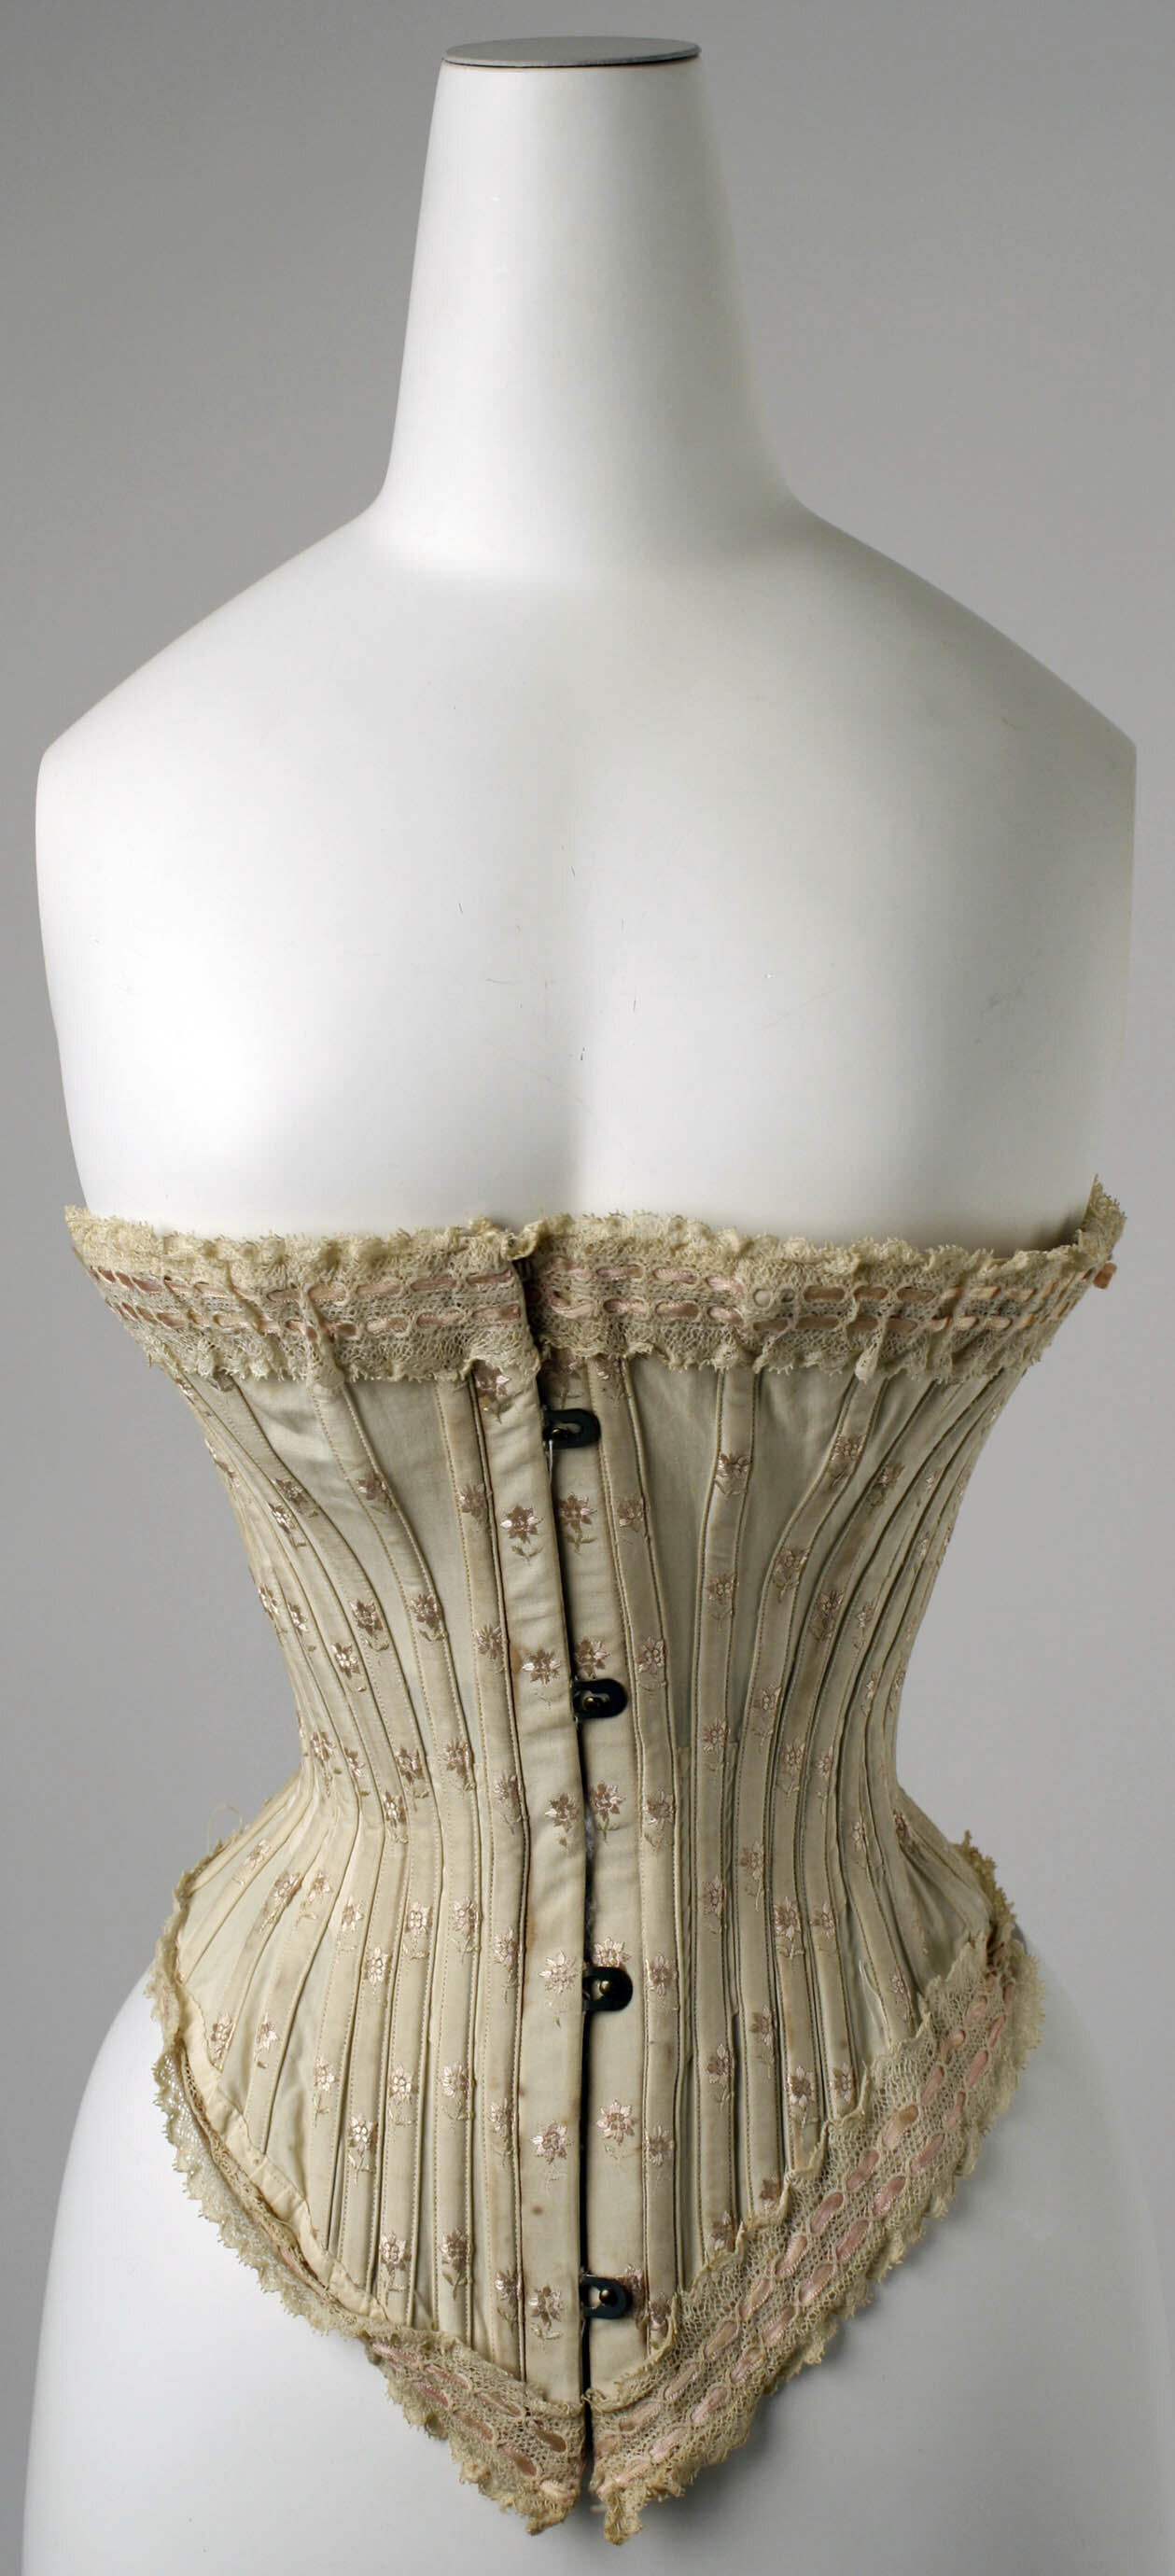 This French corset from the 1890s doesn't offer much support for the orbs.